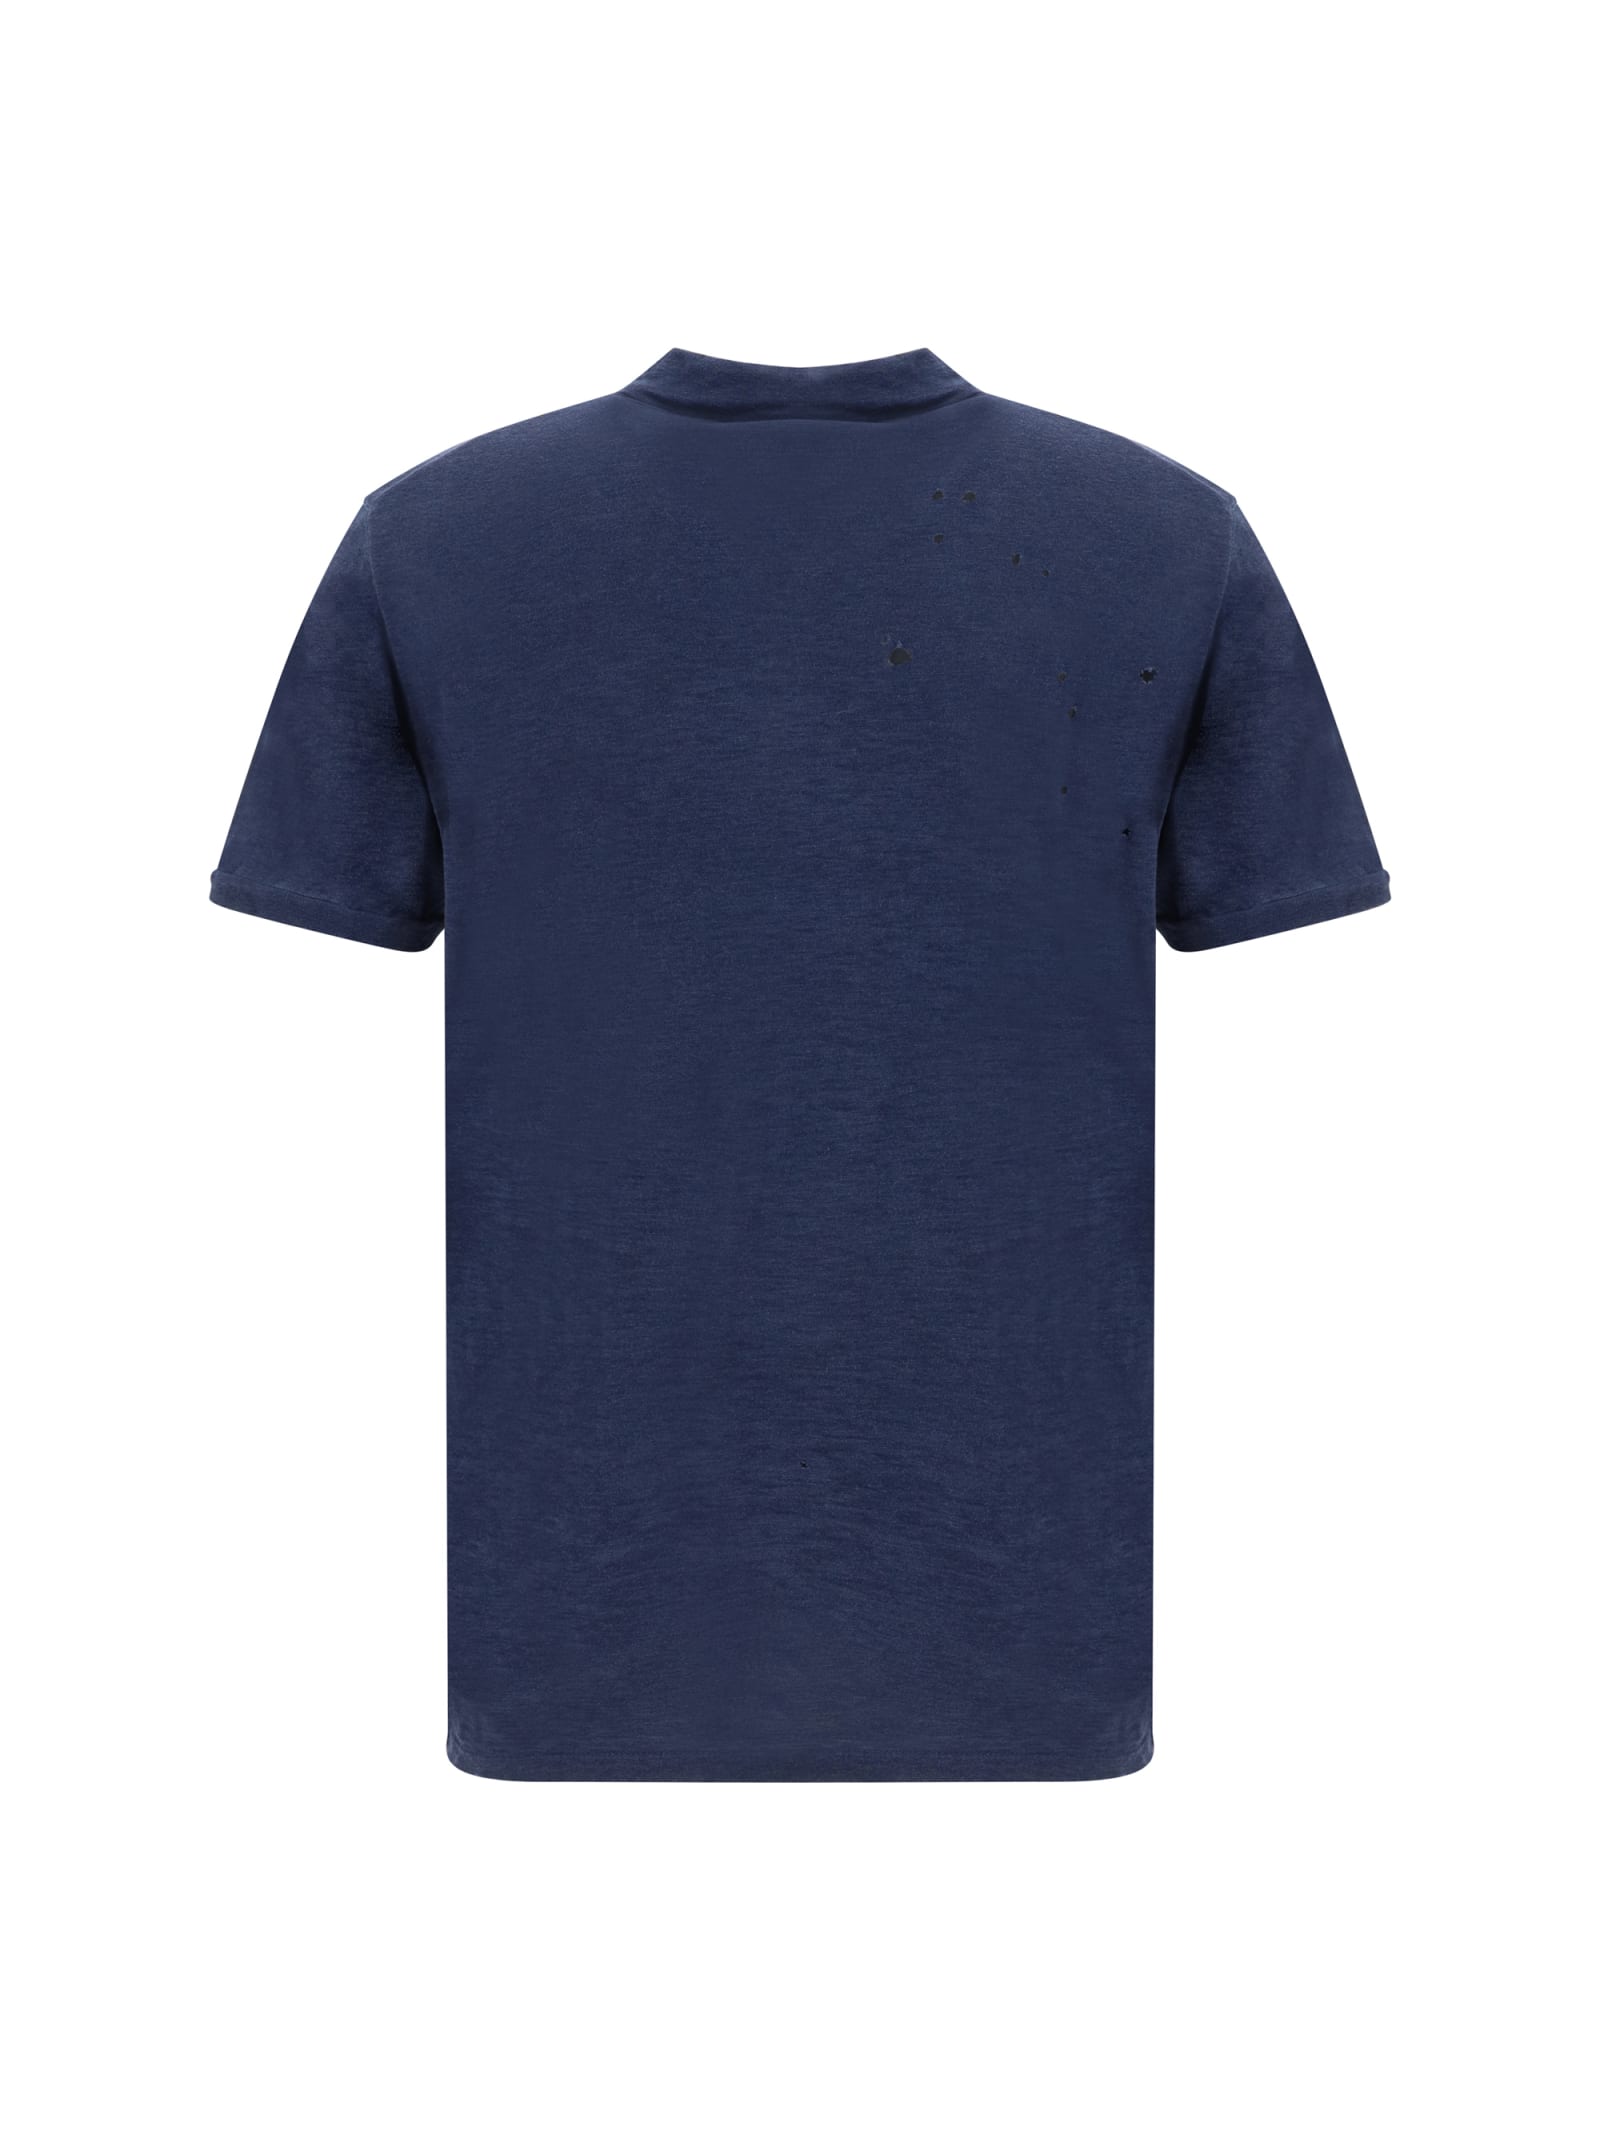 Shop Dsquared2 Polo Shirt In Navy Blue